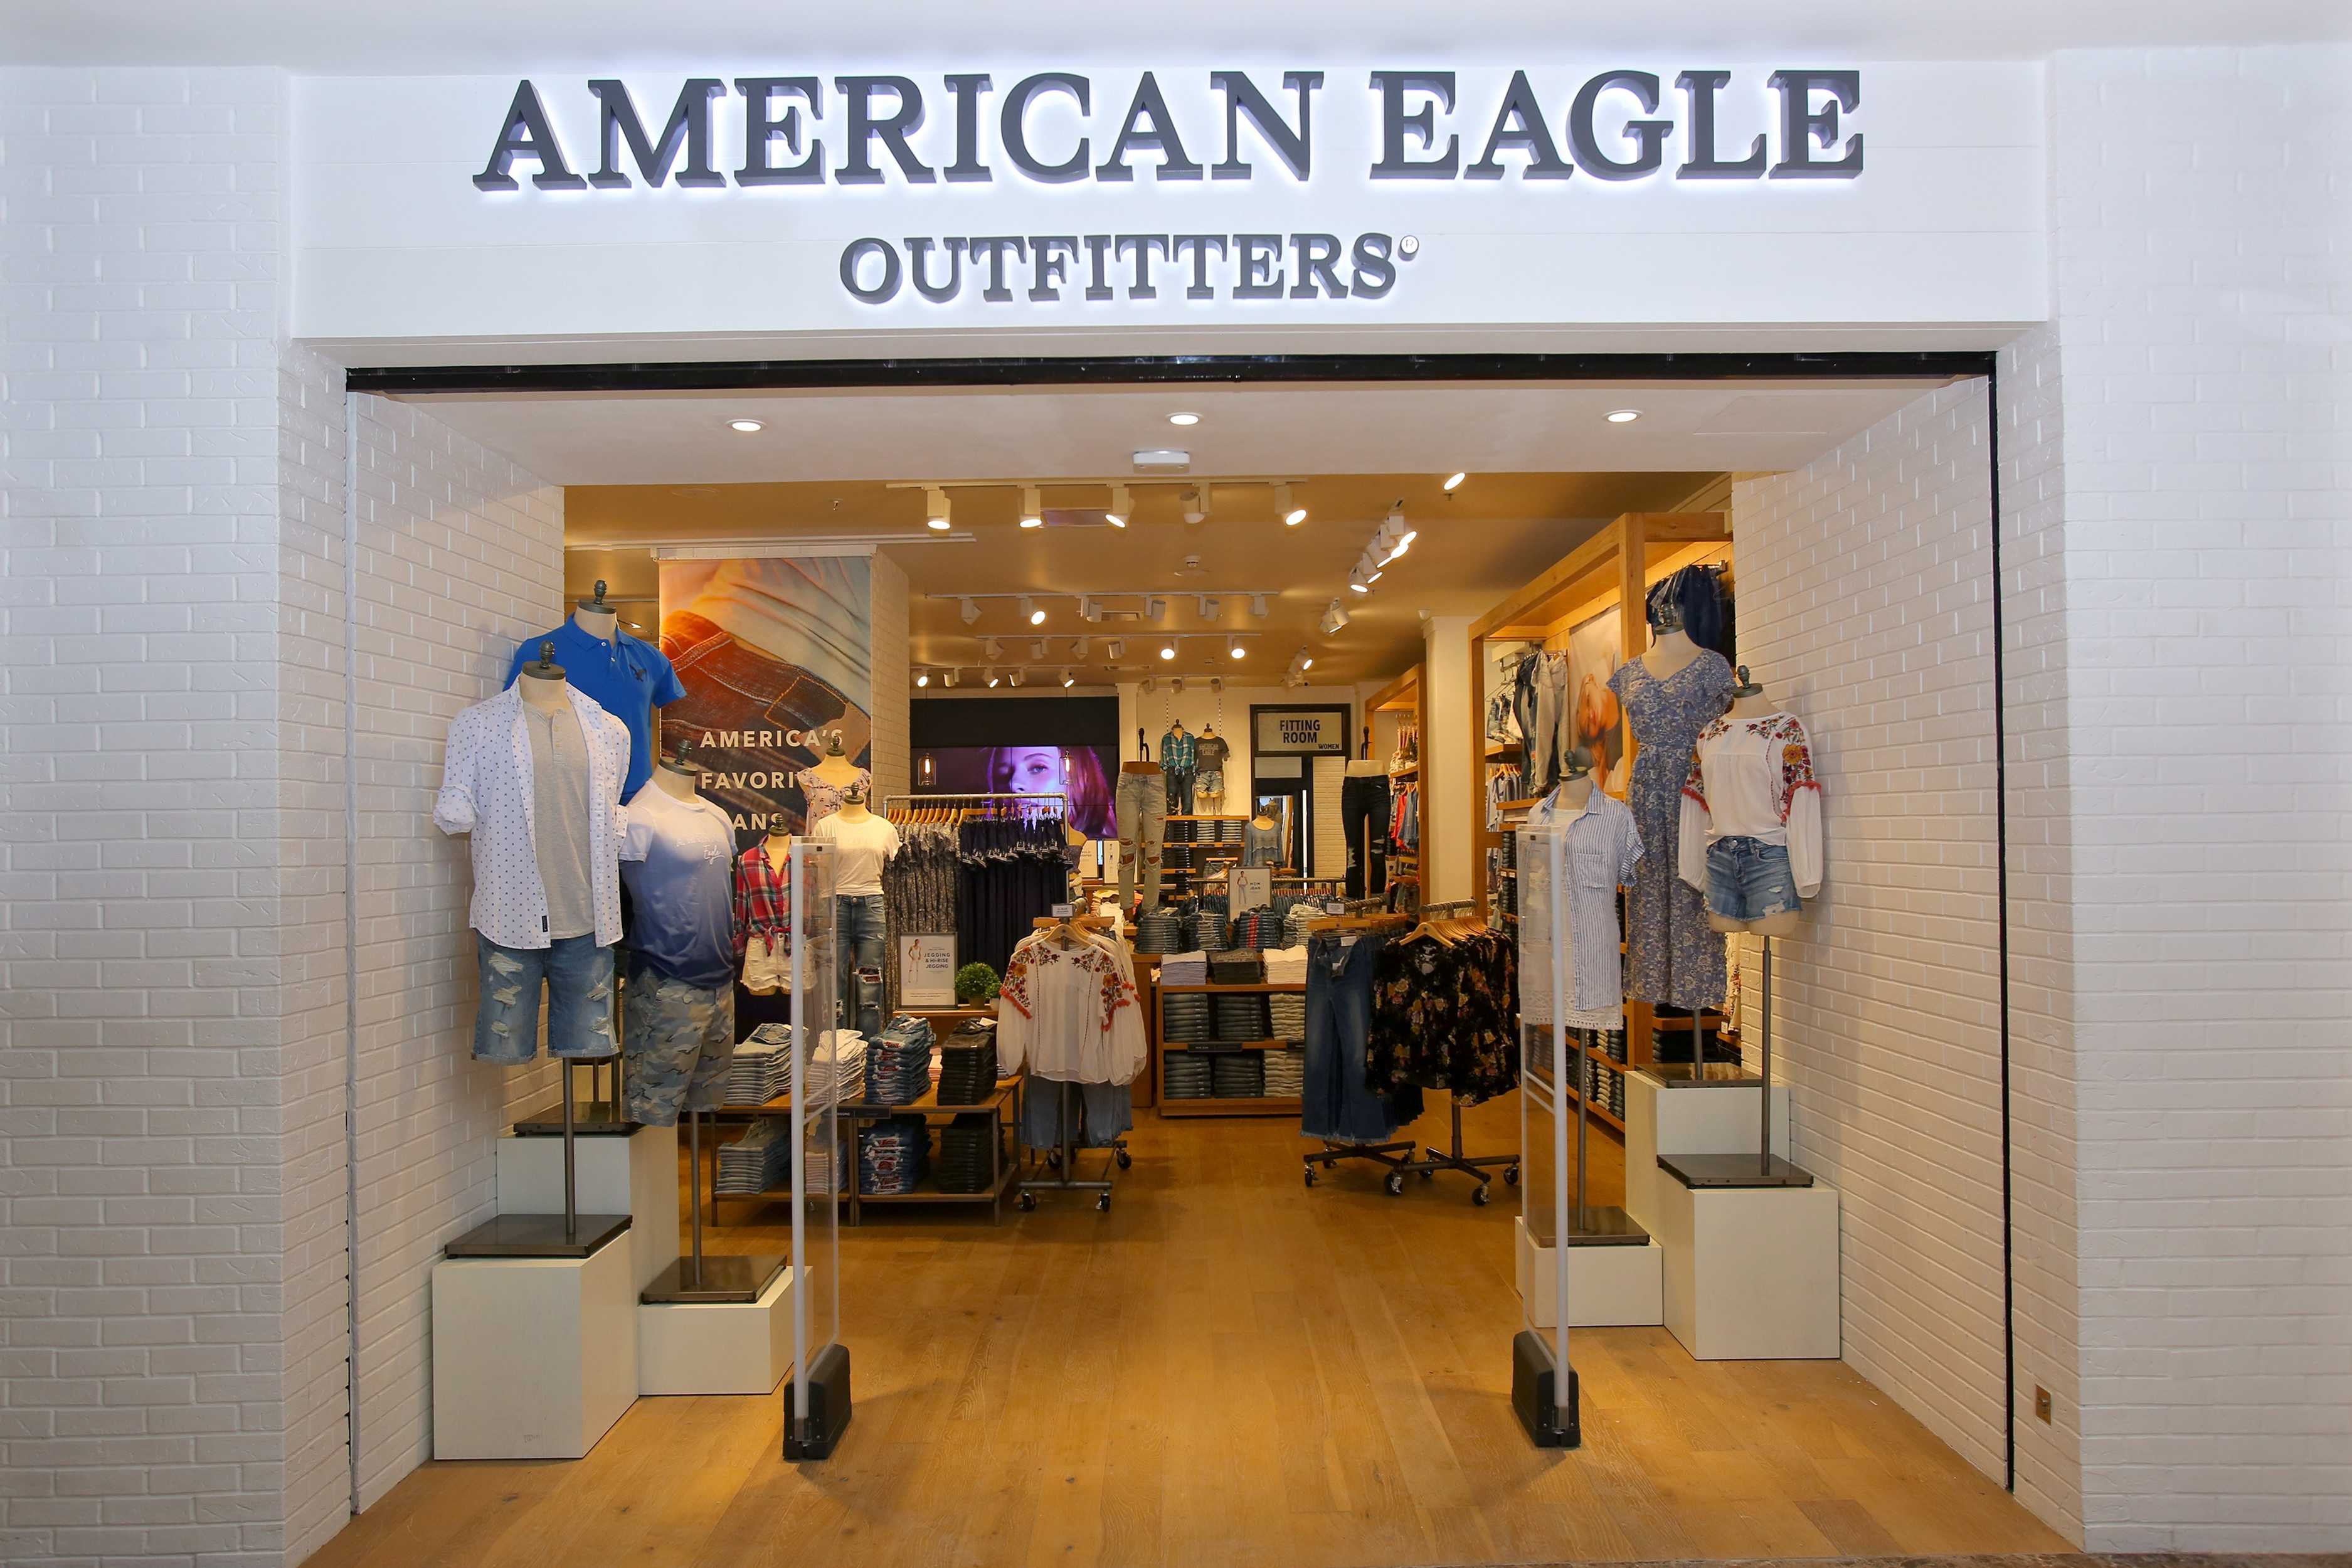 American eagle outfitters